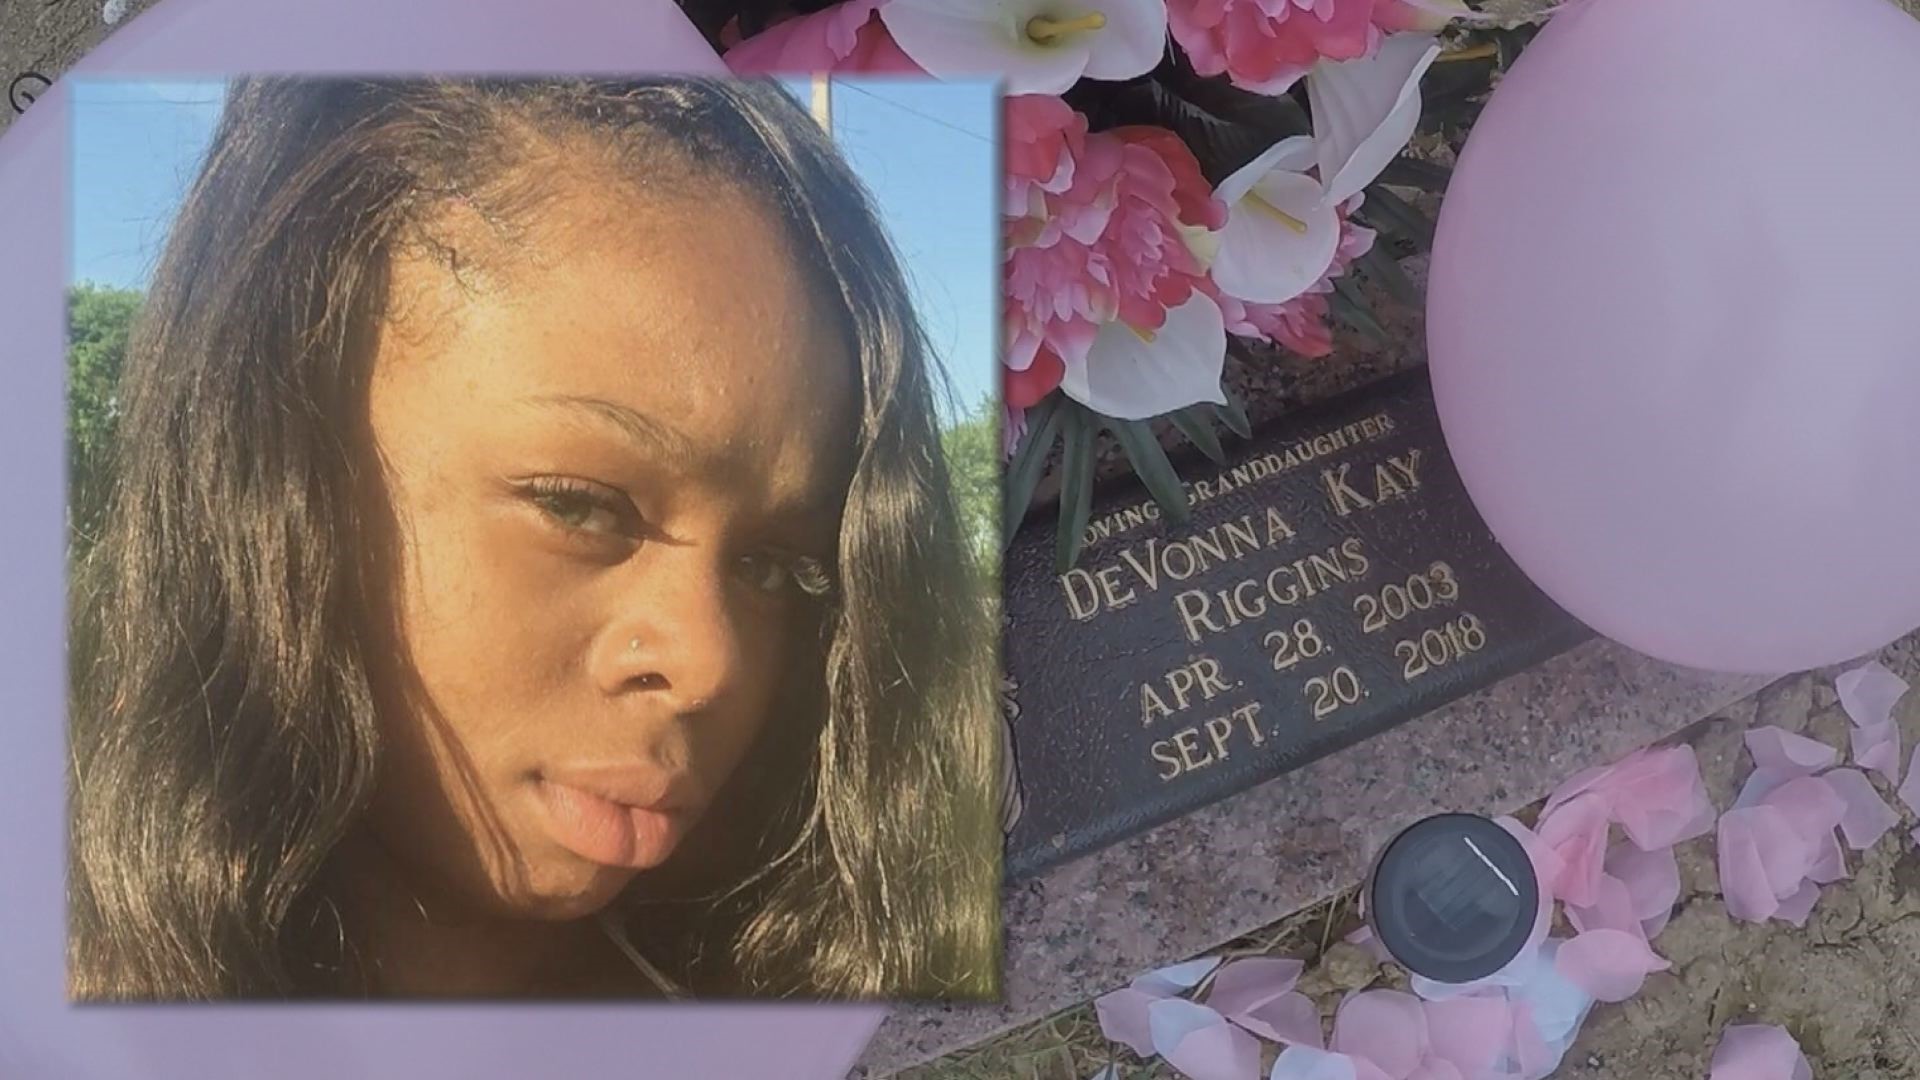 The St. Louis Circuit Attorney will not accept charges in the case of a murdered 15-year-old because the investigator is on the 'exclusion list'.